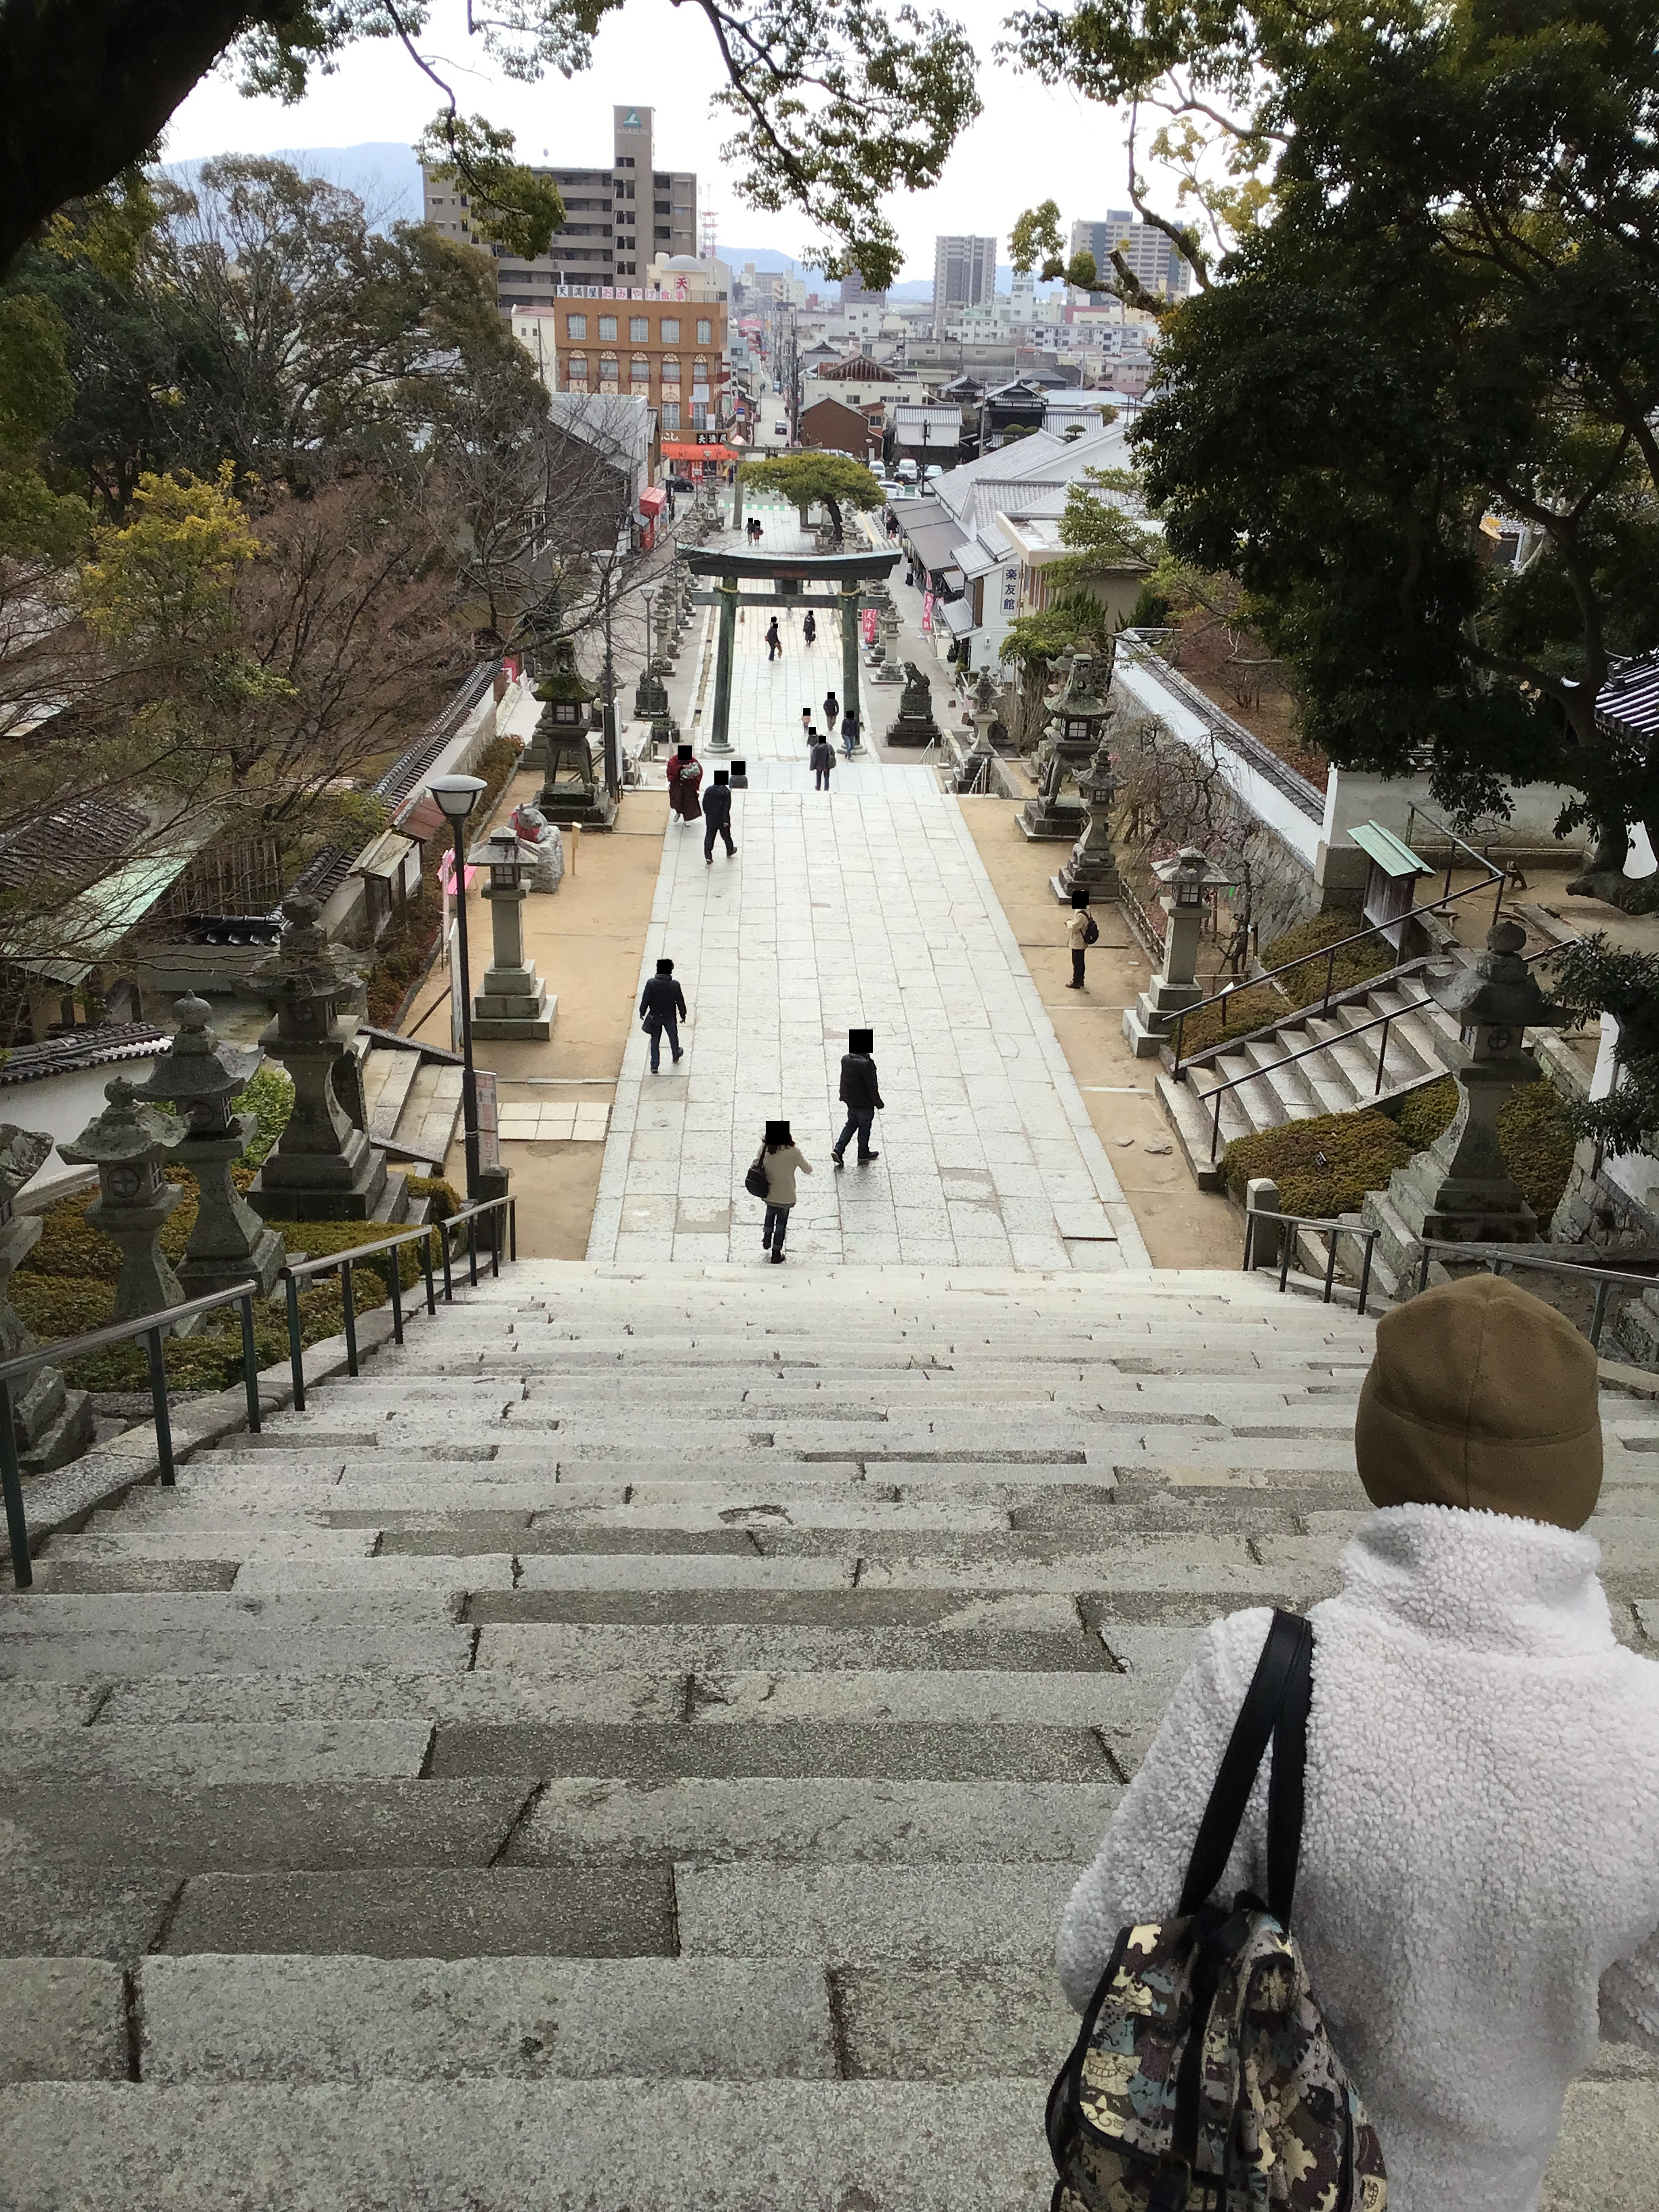 The view from the top of the stairs at a Shinto Shrine